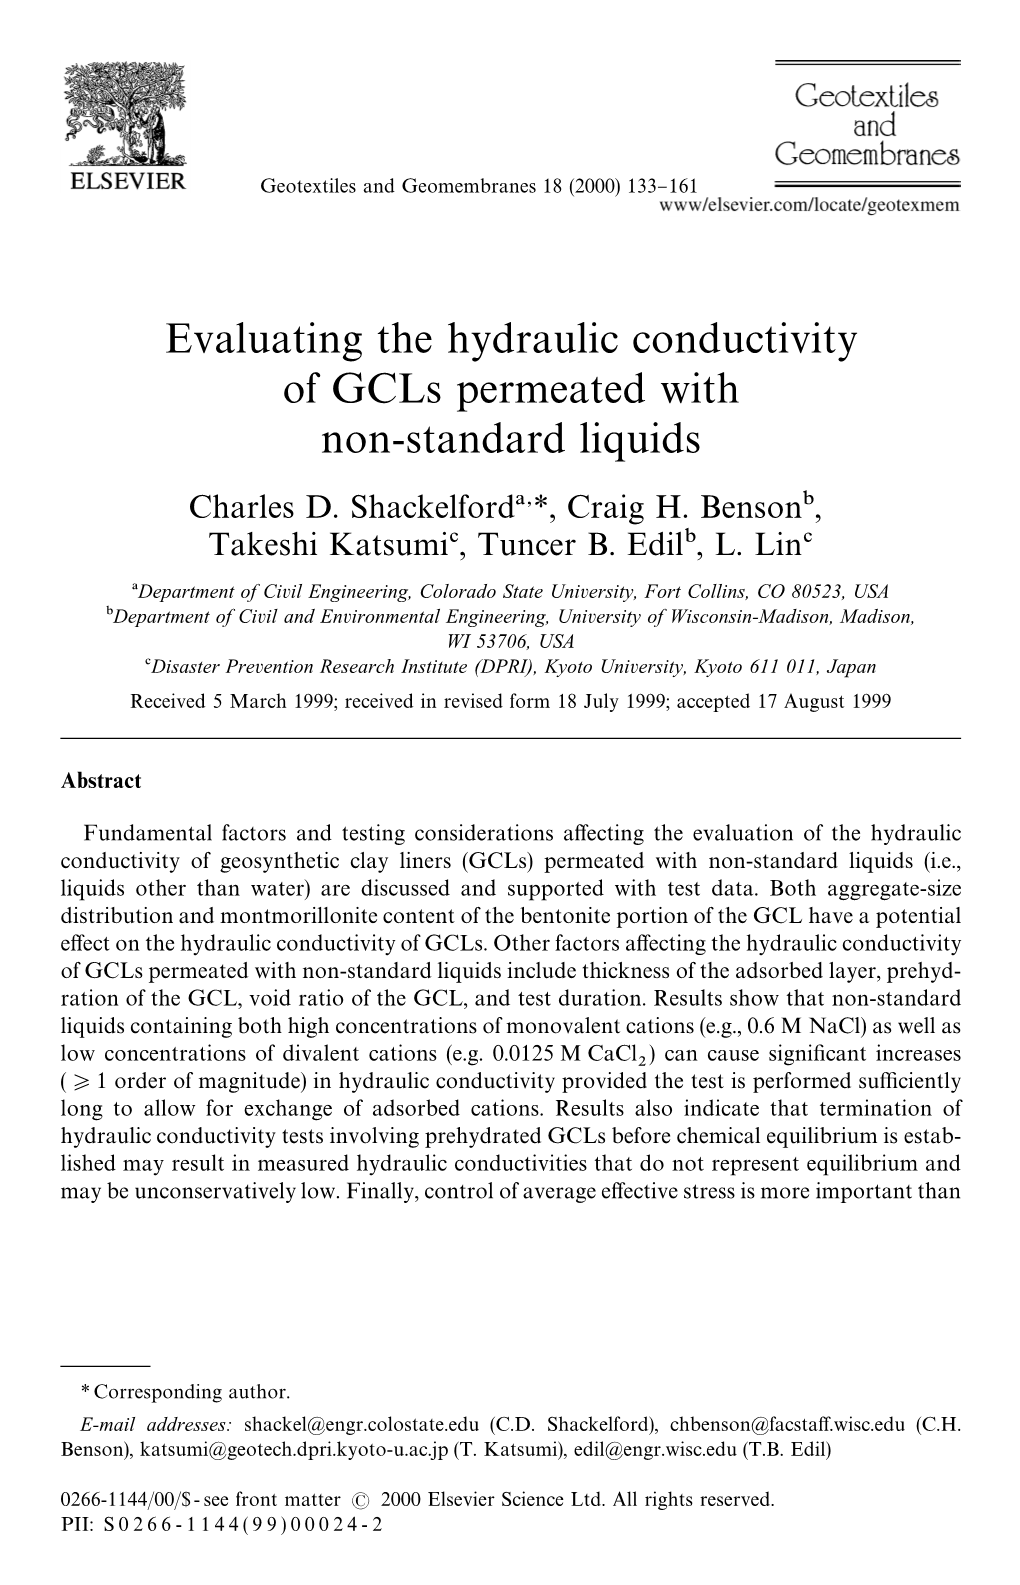 Evaluating the Hydraulic Conductivity of Gcls Permeated with Non-Standard Liquids Charles D